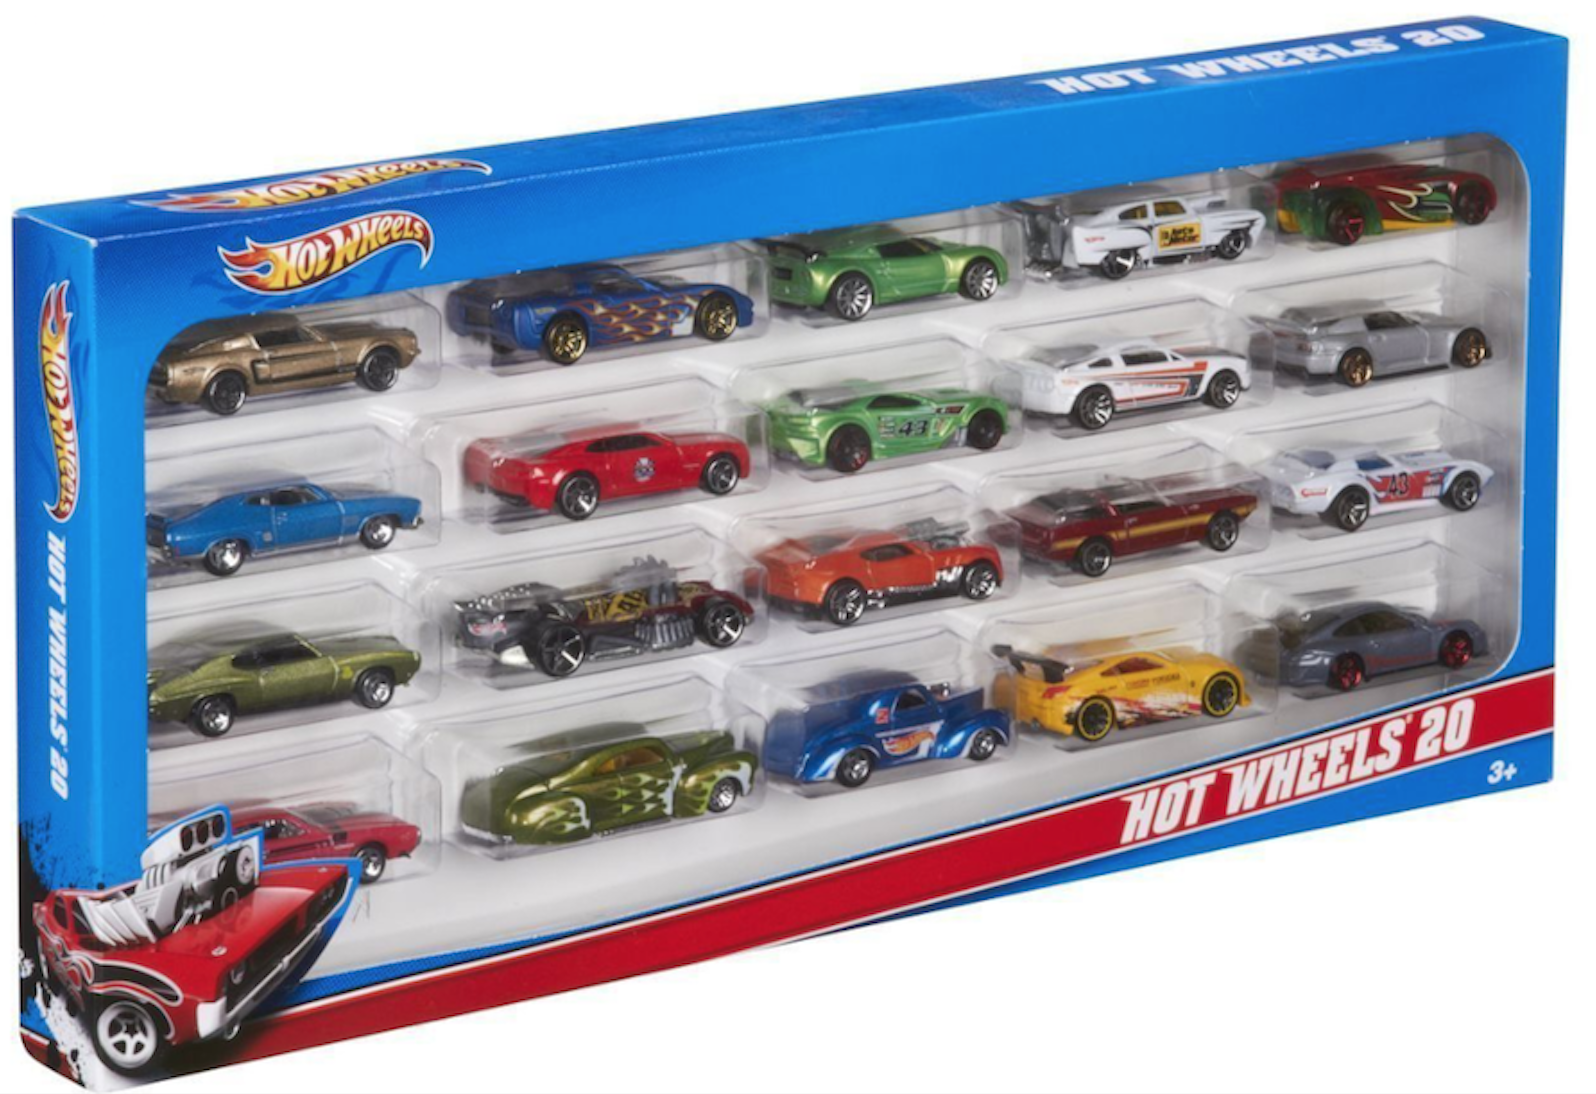 valuable toy cars